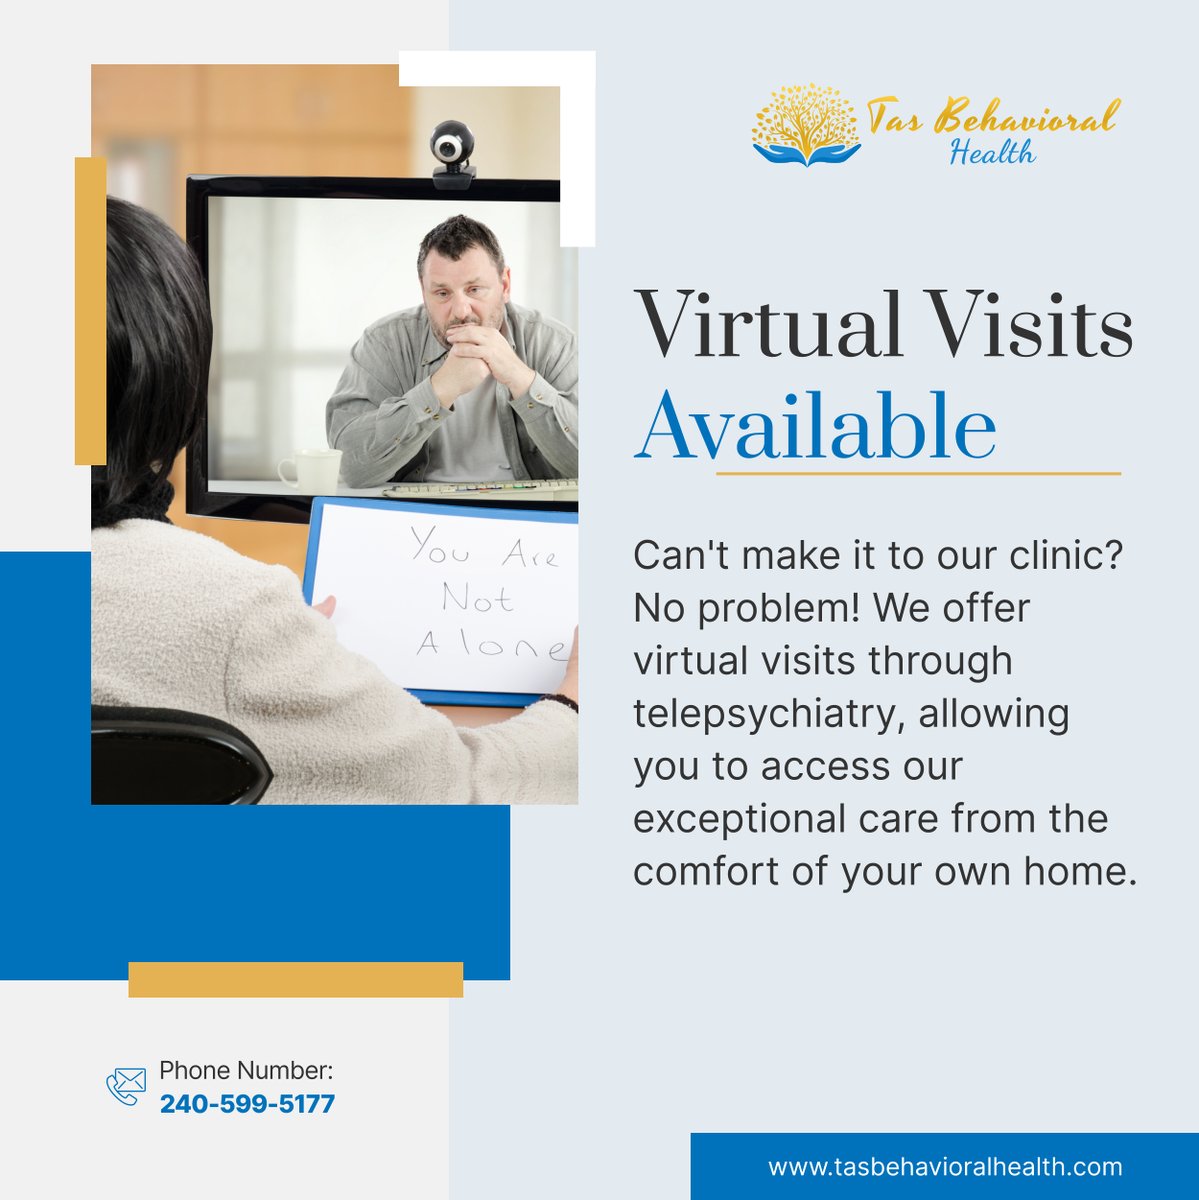 Our goal is to ensure accessible care for all our clients across Maryland. With virtual visits via telepsychiatry, quality care is just a click away. Discover more about us here: tinyurl.com/3bchsk2r. #CumberlandMD #MentalHealthClinic #VirtualVisits